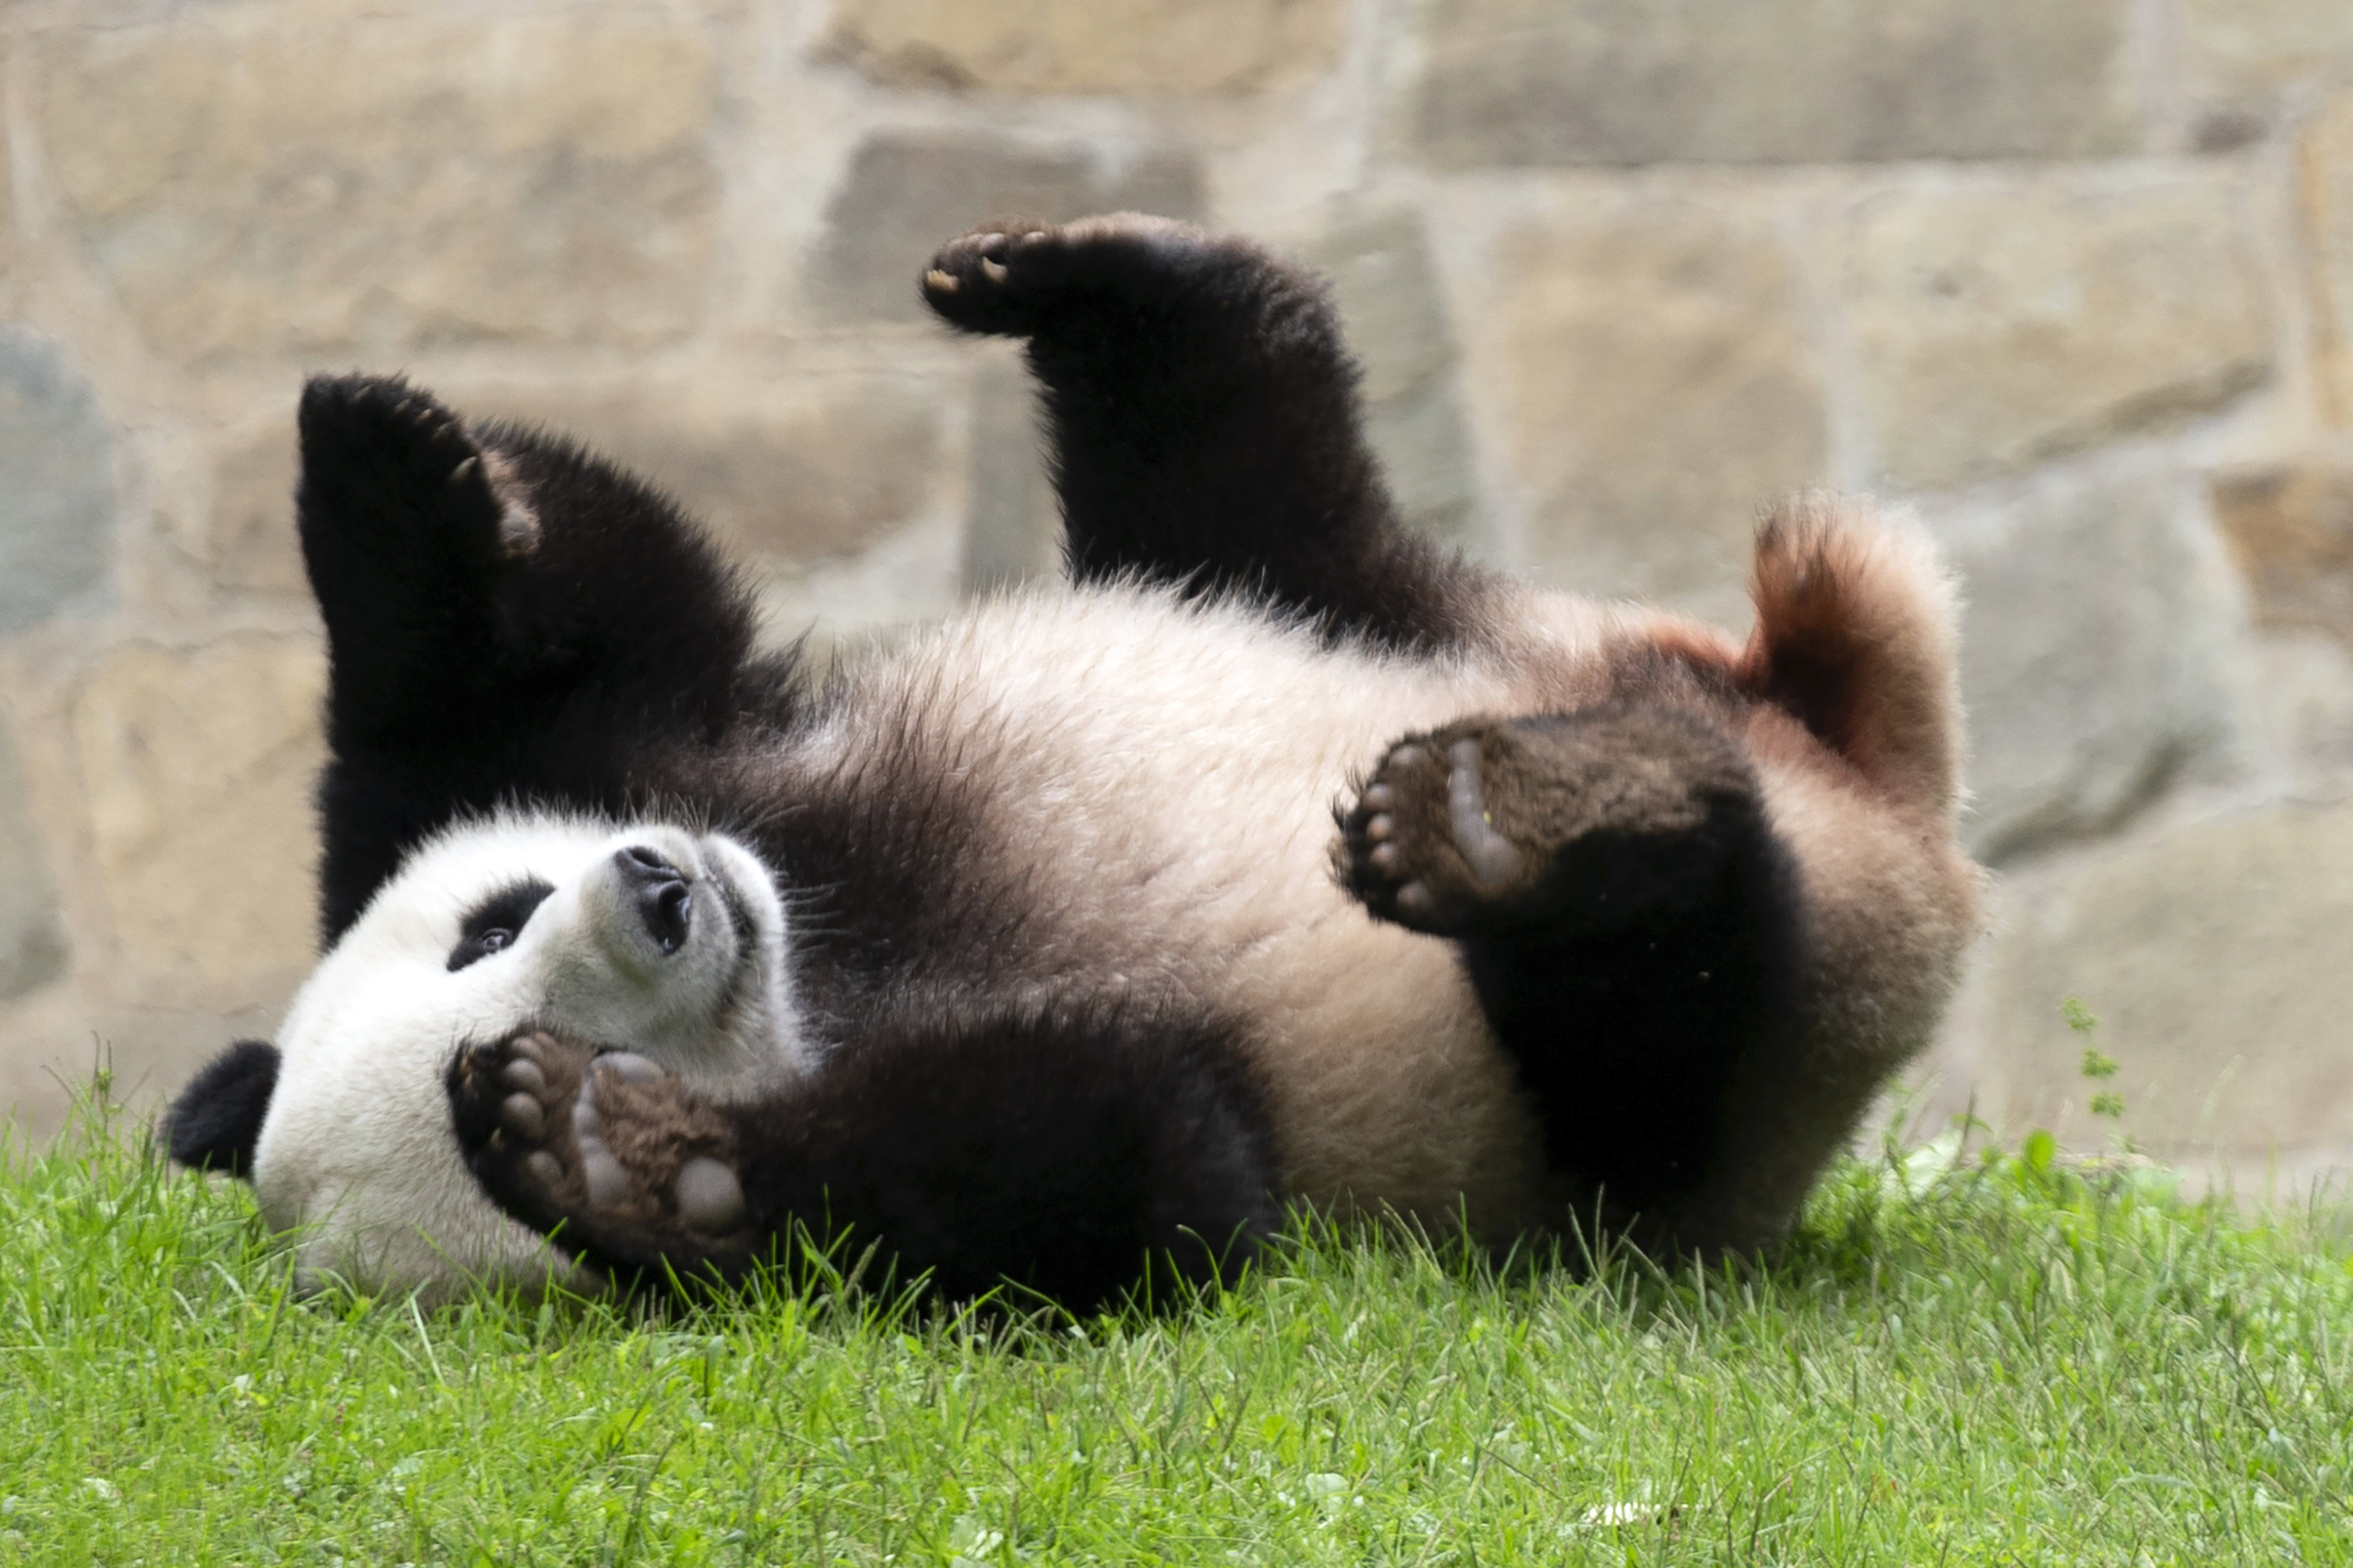 Three-year-old cub Xiao Qi Ji plays in his enclosure at the National Zoo in Washington on September 28. Days later, he and his parents were sent back to China. Photo: AP